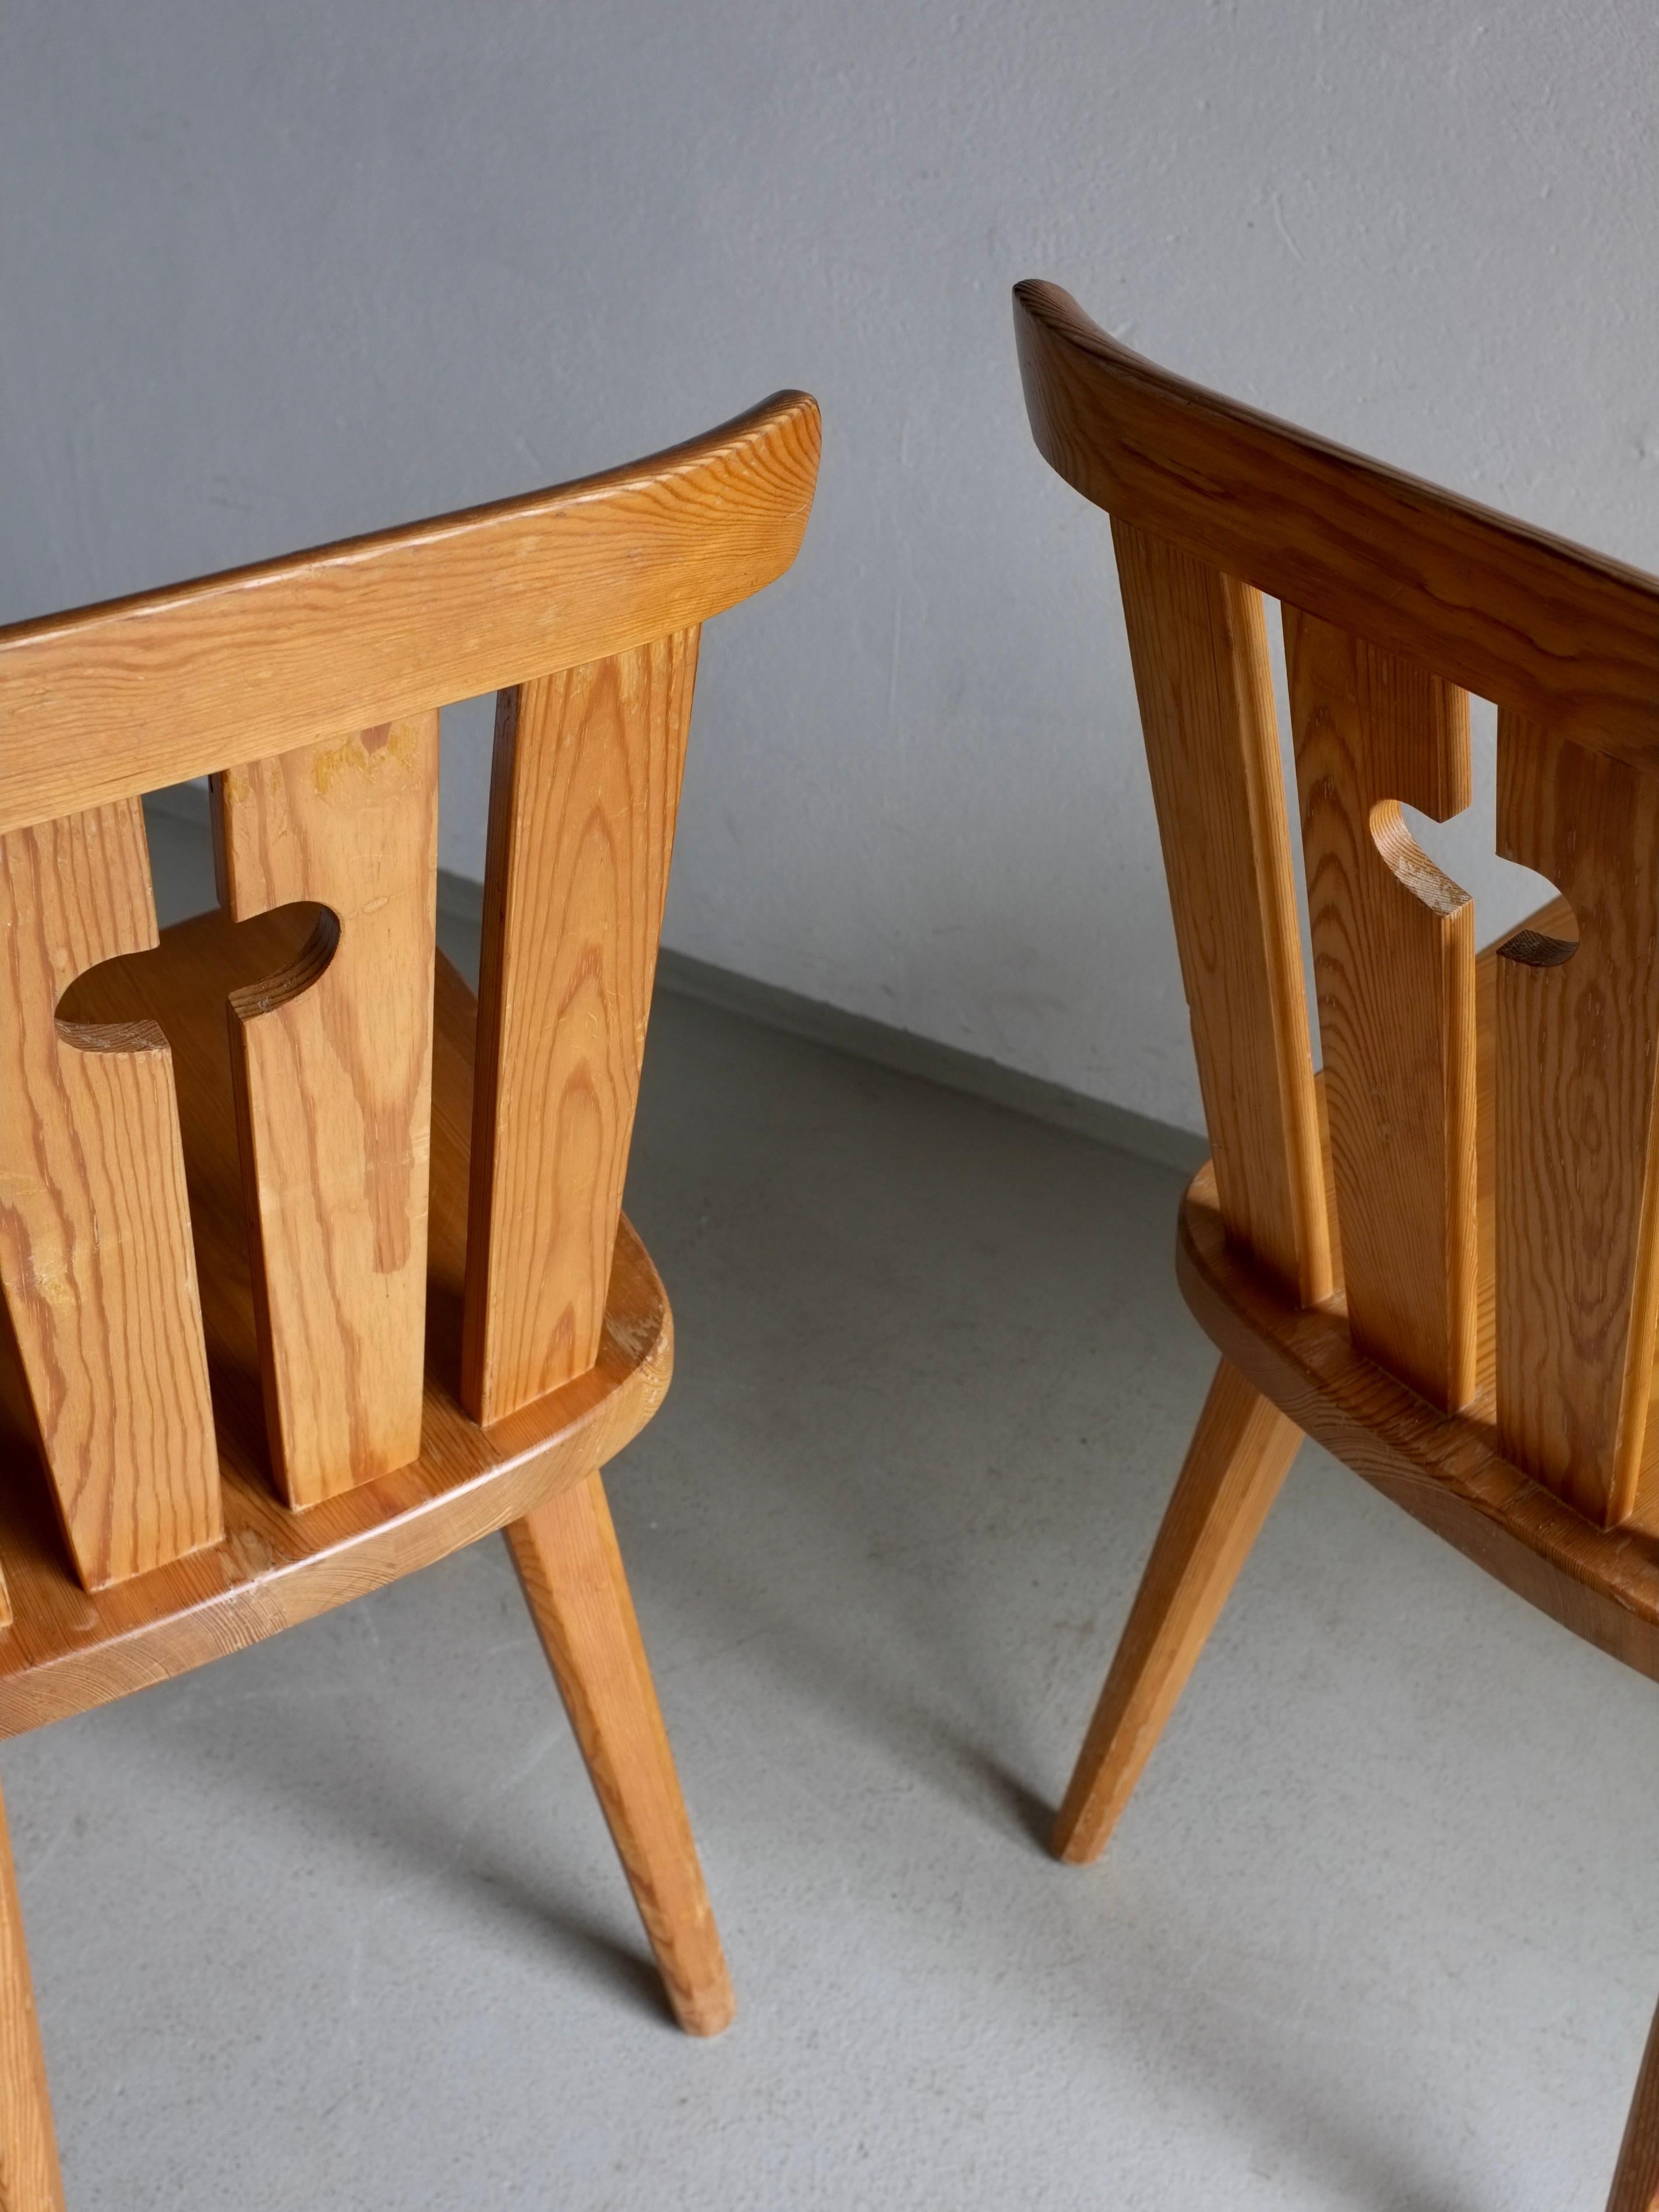 Set of 2 Solid Pine Chairs, Göran Malmvall, Sweden 1940s In Good Condition For Sale In Rīga, LV